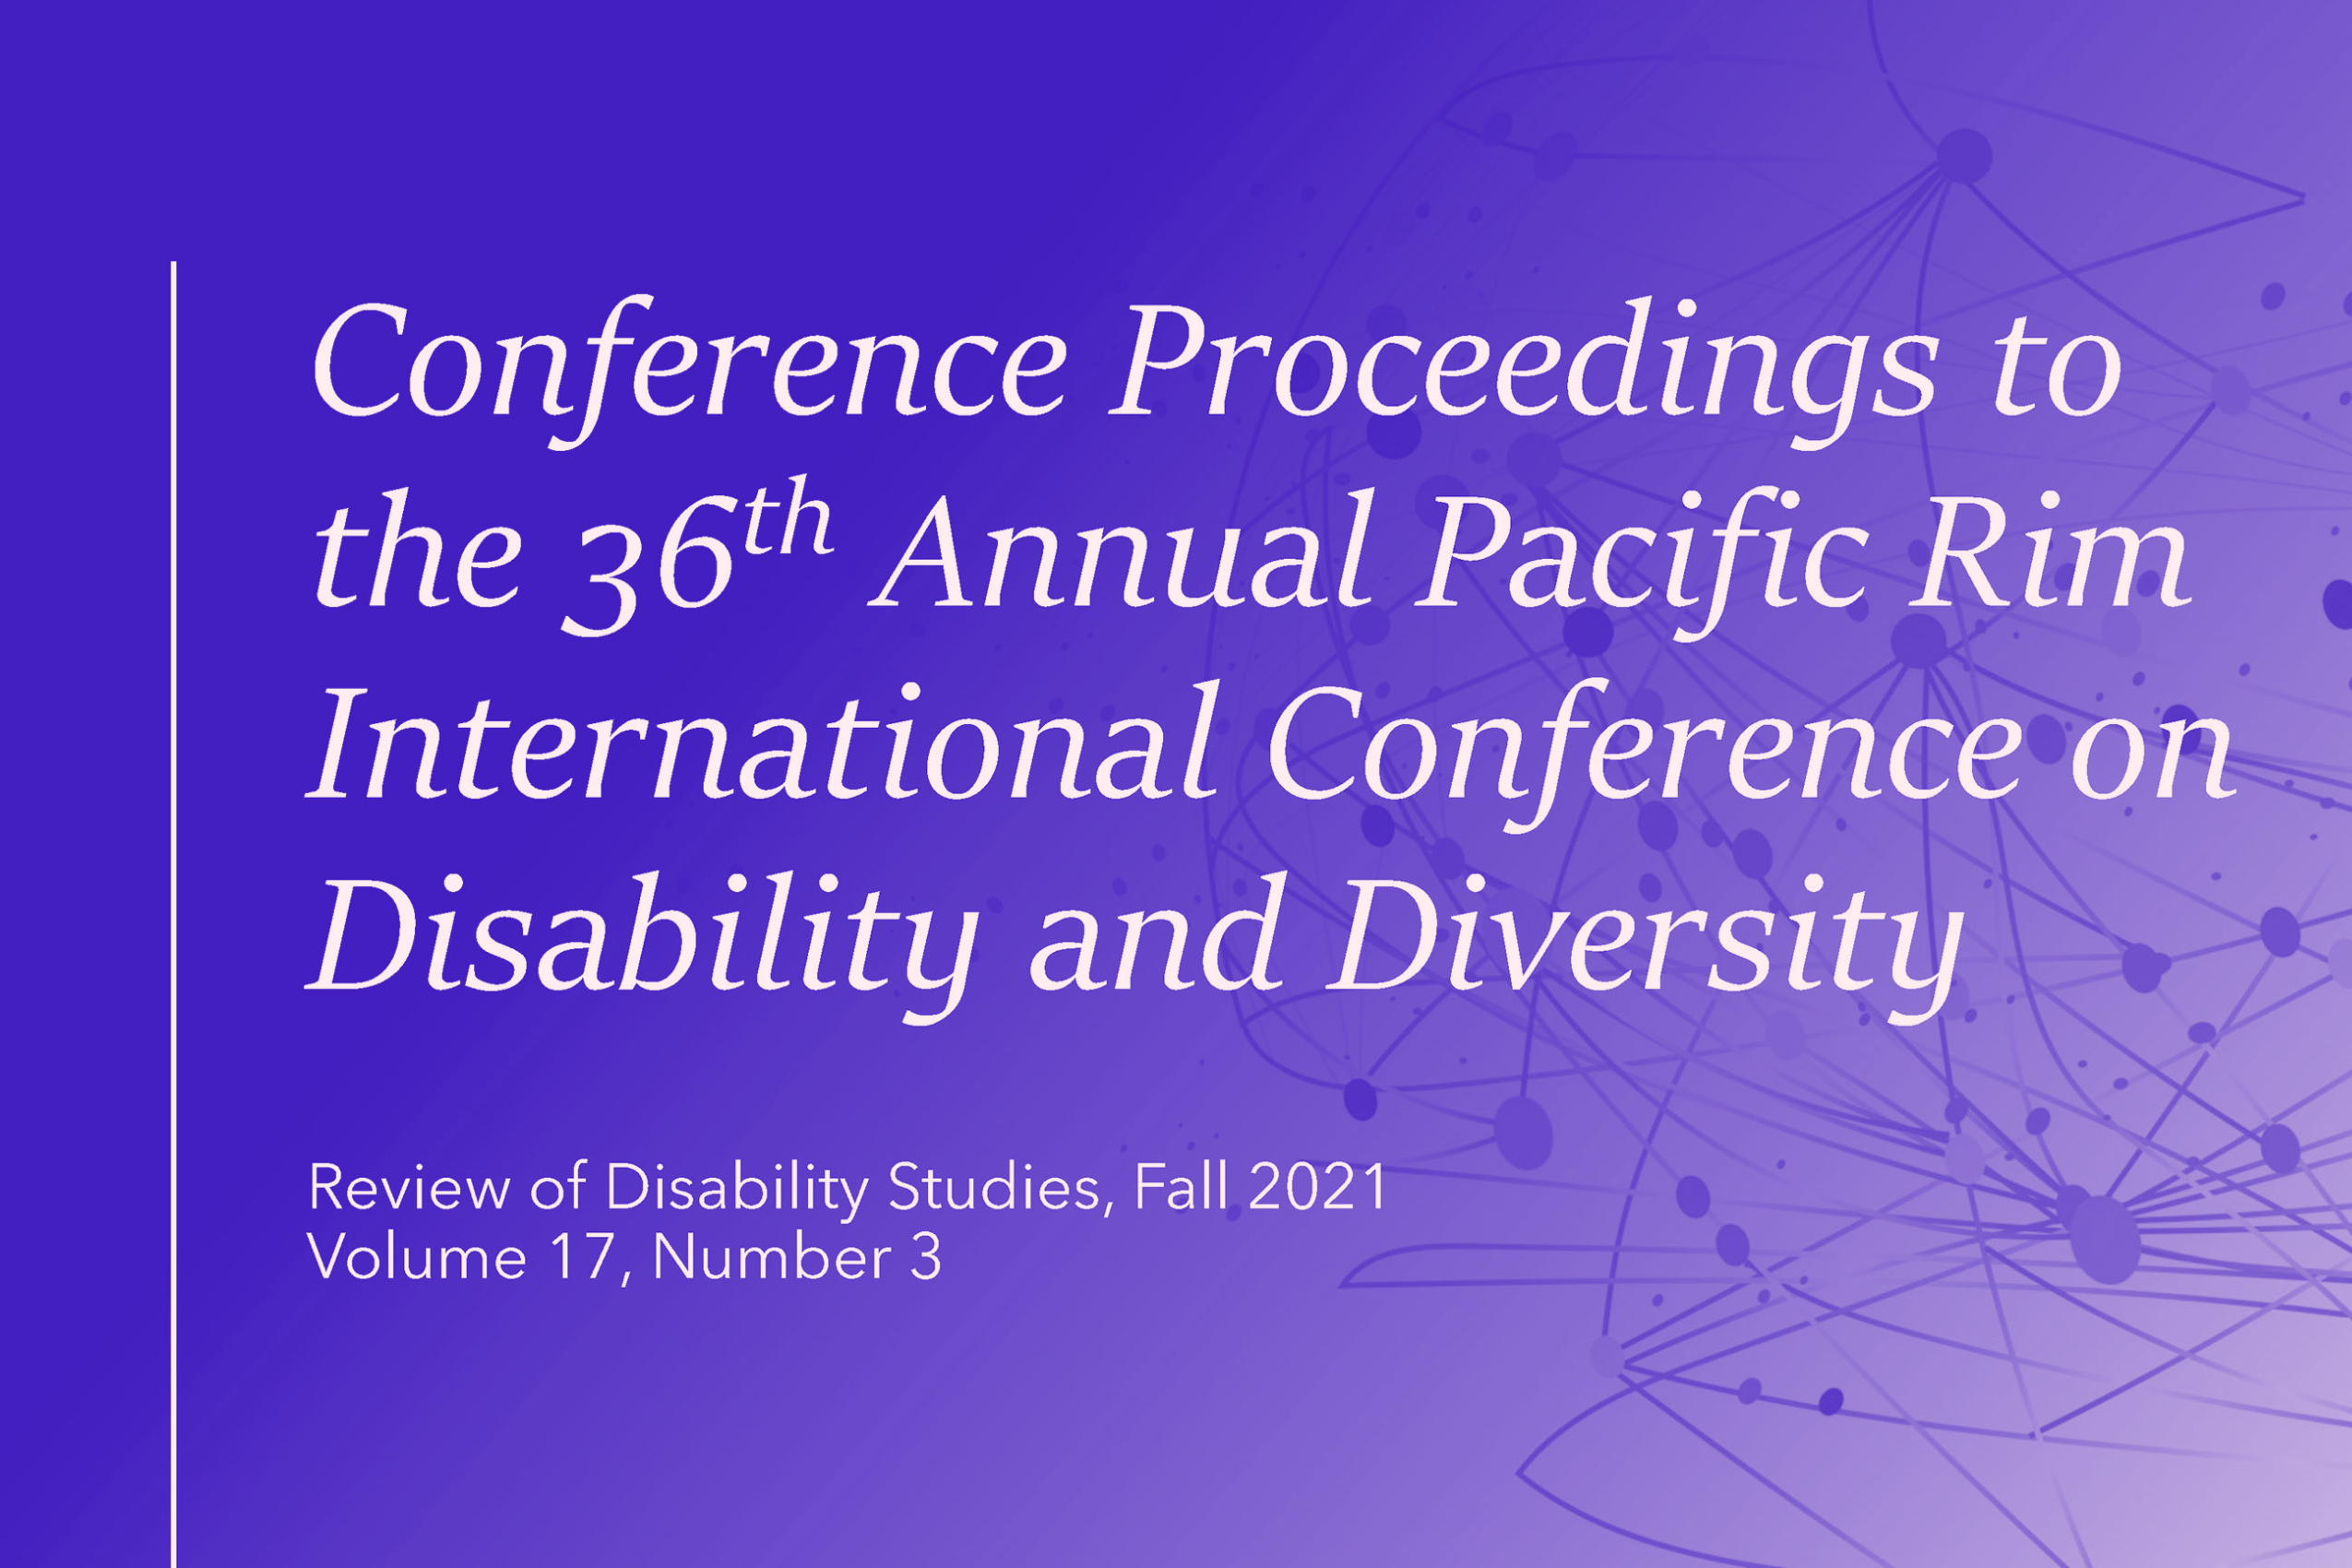 Conference Proceedings to the 36th Annual Pacific Rim International Conference on Disability and Diversity